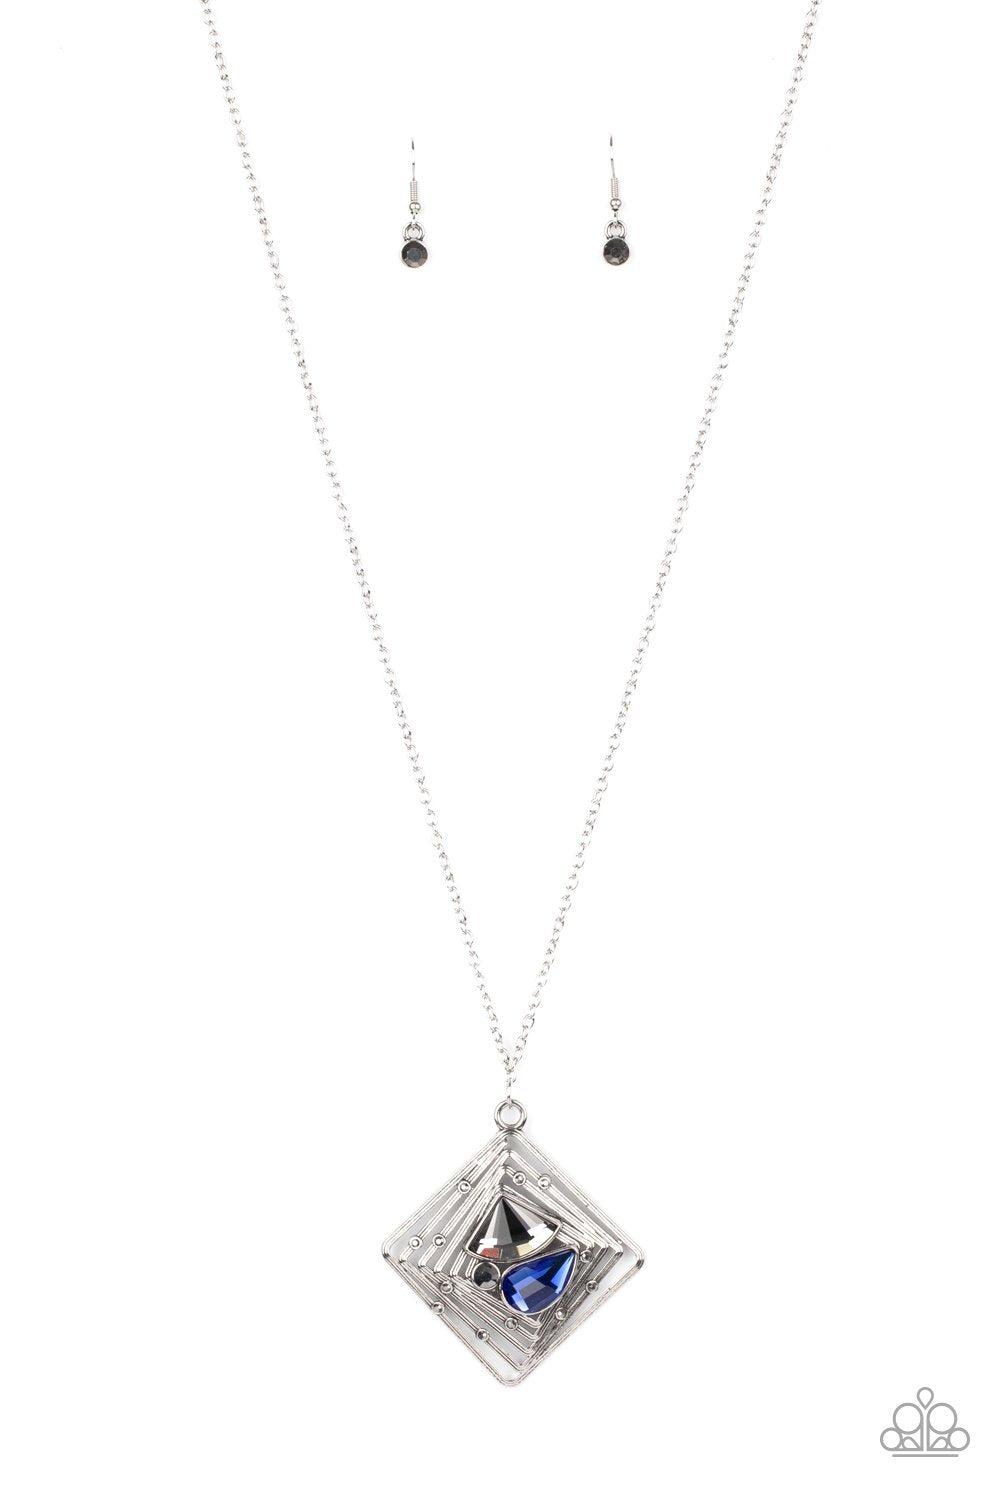 Timelessly Tilted Blue and Silver Rhinestone Pendant Necklace - Paparazzi Accessories-CarasShop.com - $5 Jewelry by Cara Jewels